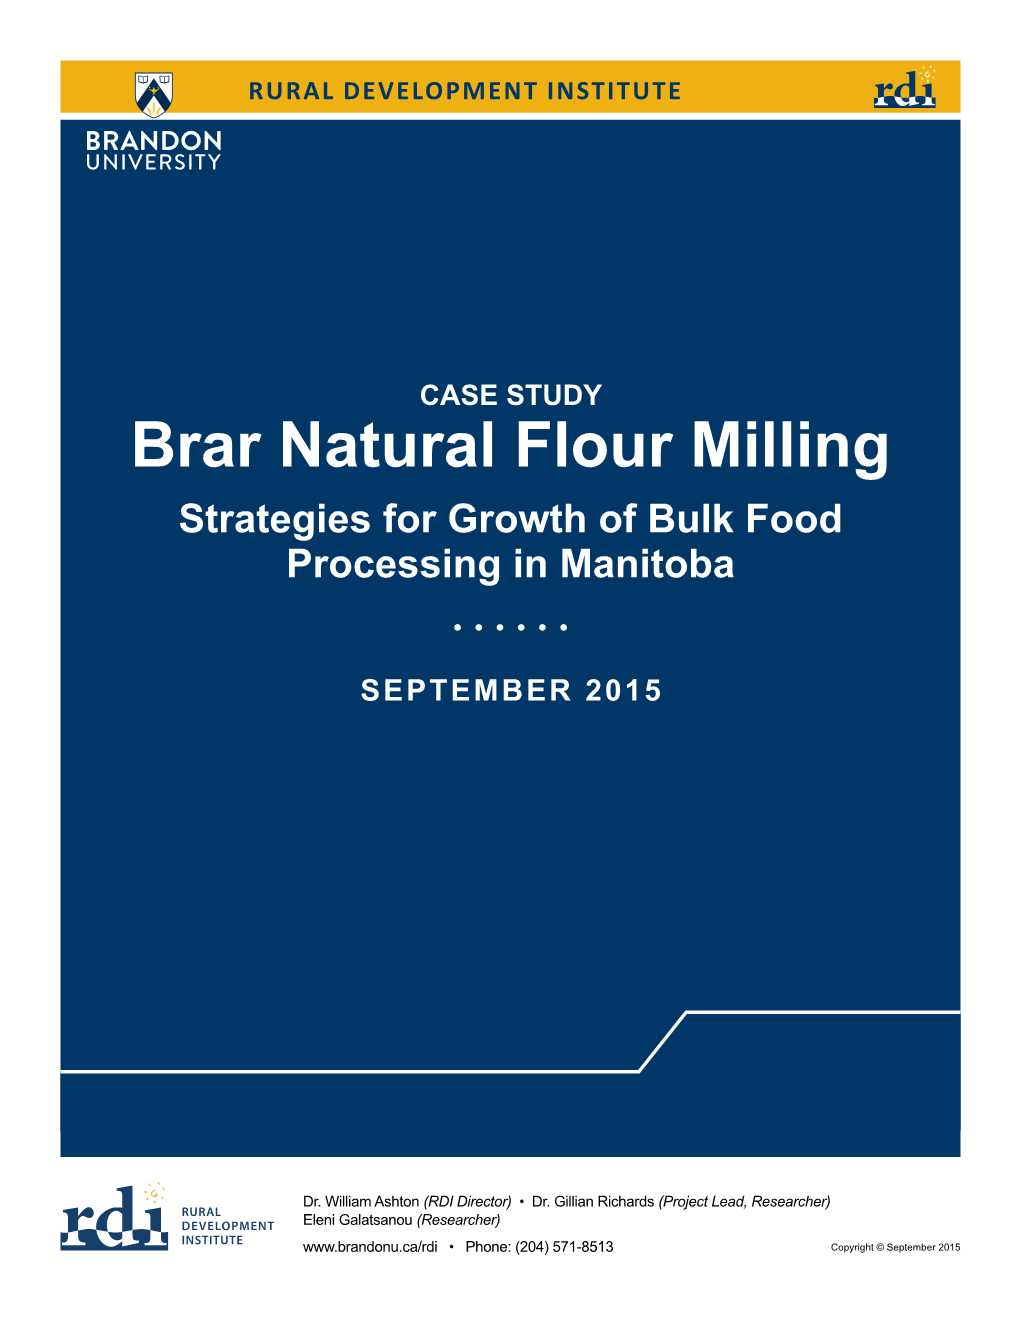 Brar Natural Flour Milling Strategies for Growth of Bulk Food Processing in Manitoba